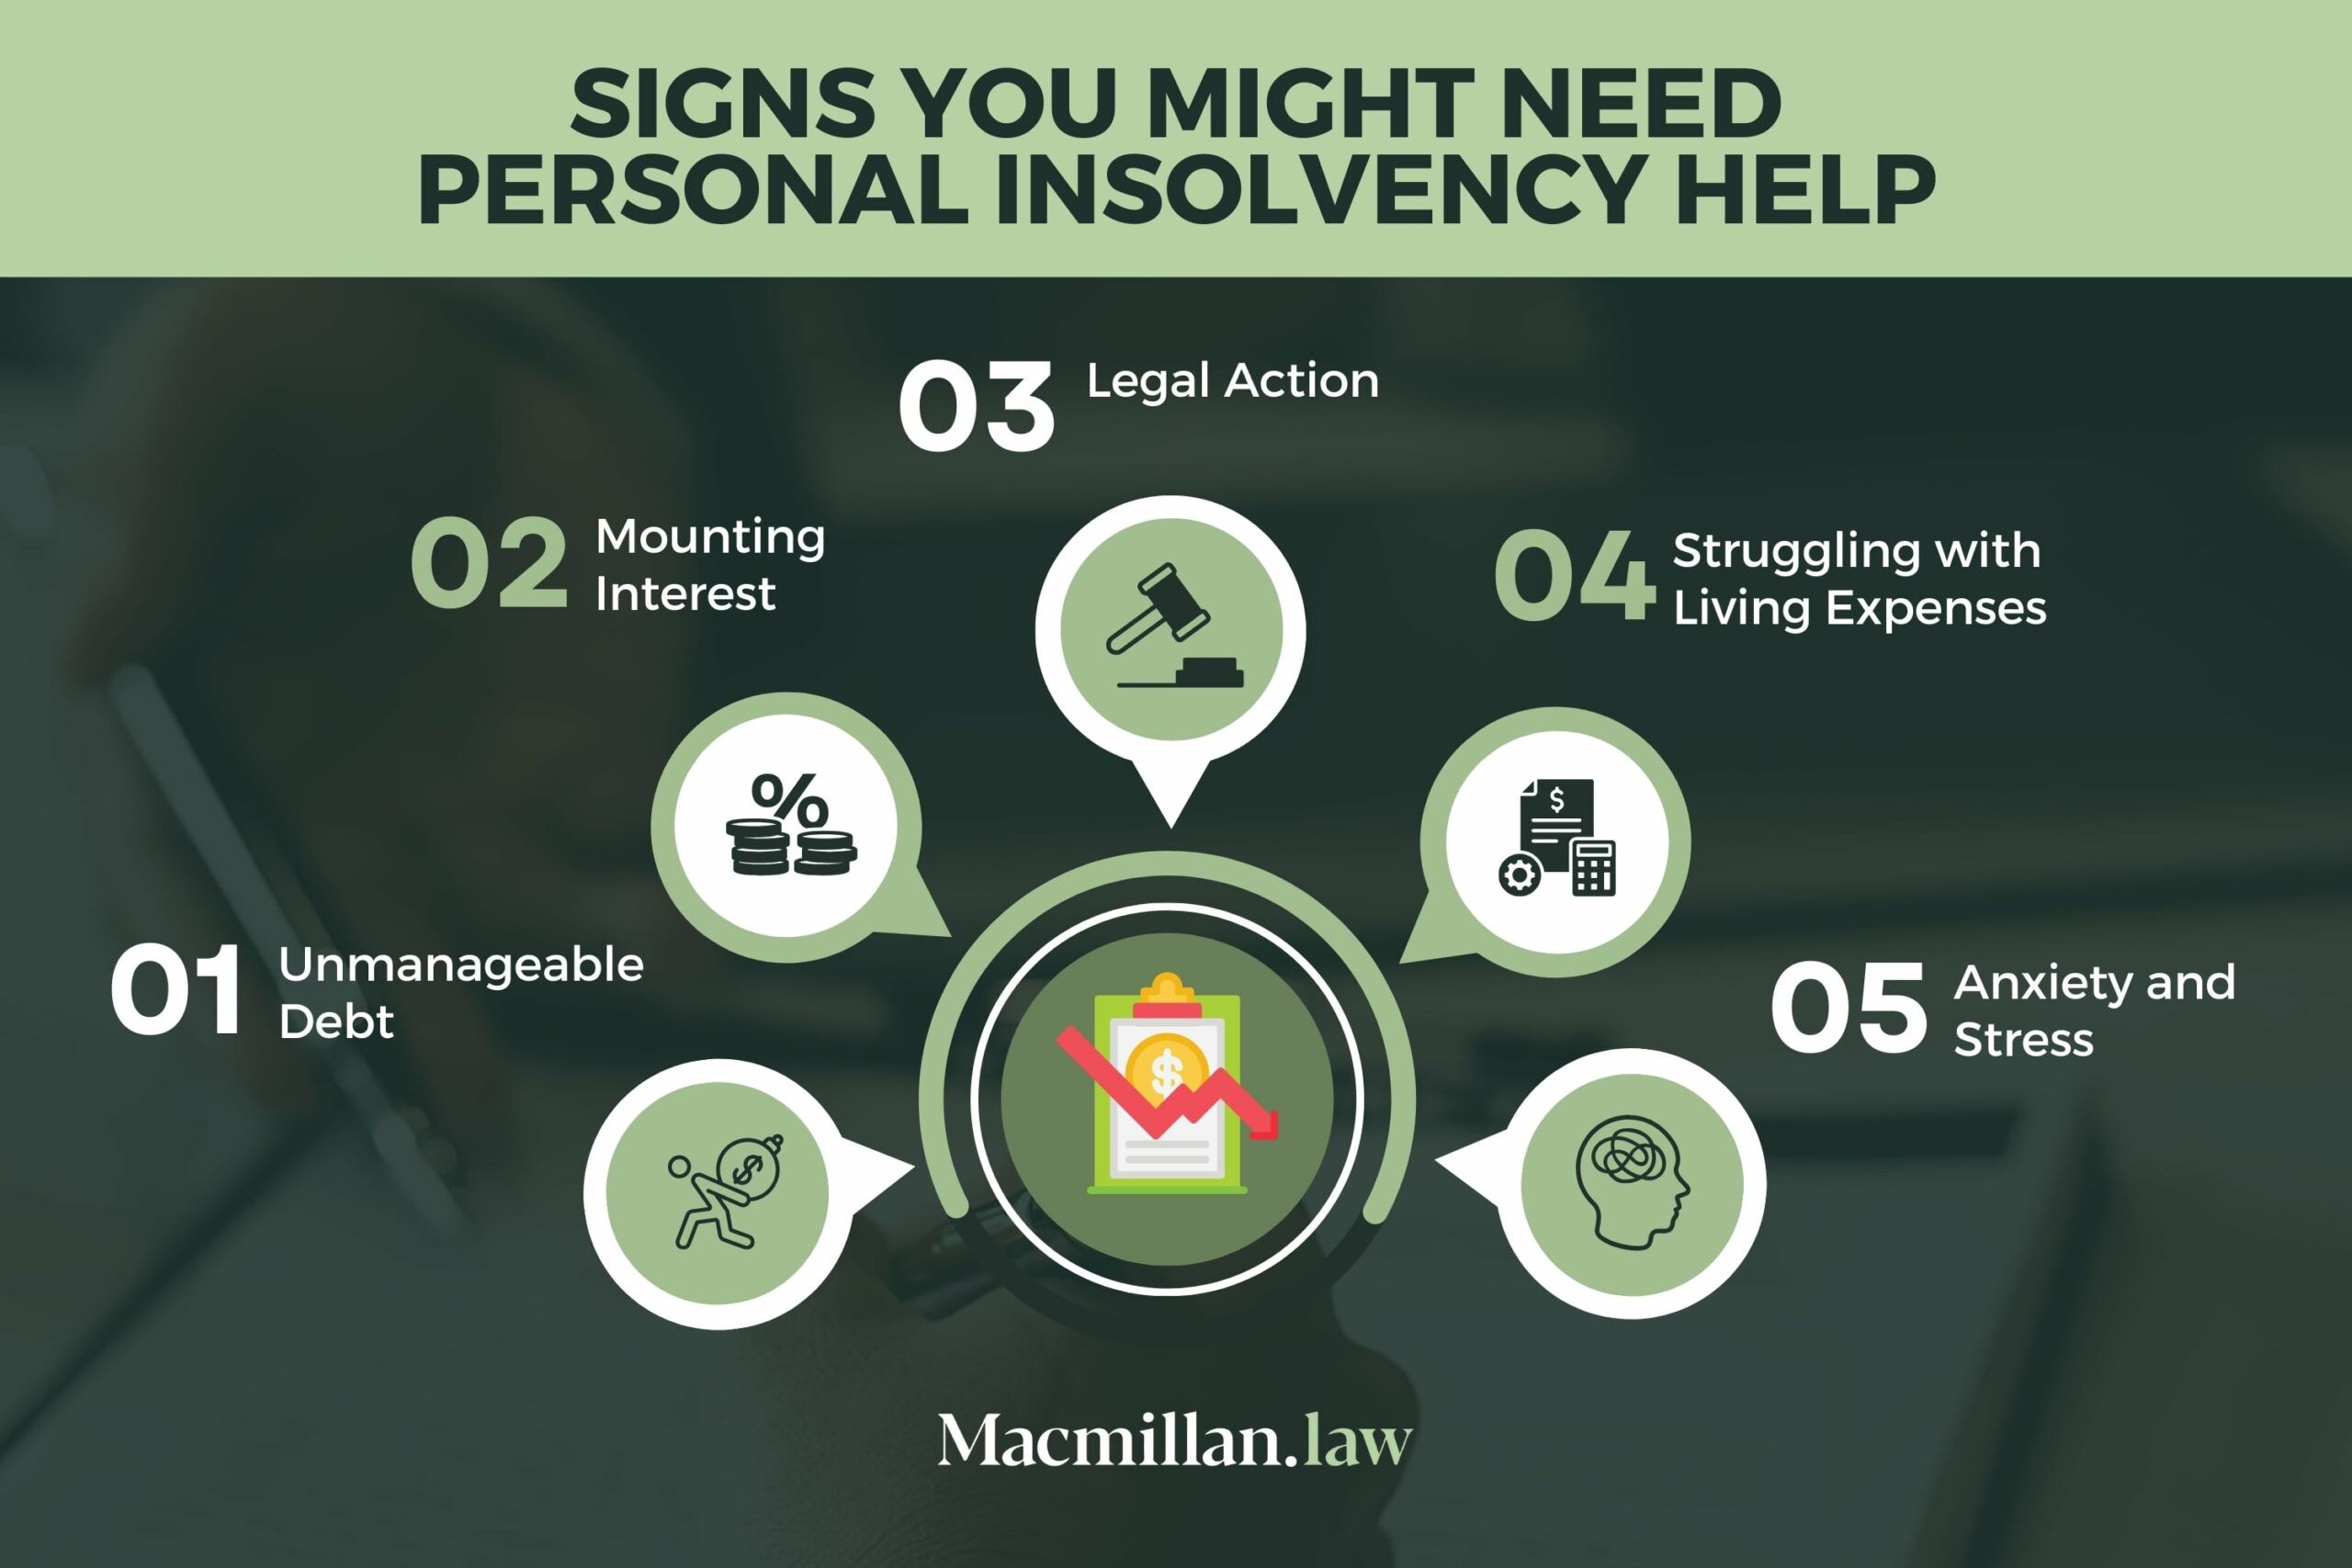 Signs you might need personal insolvency help